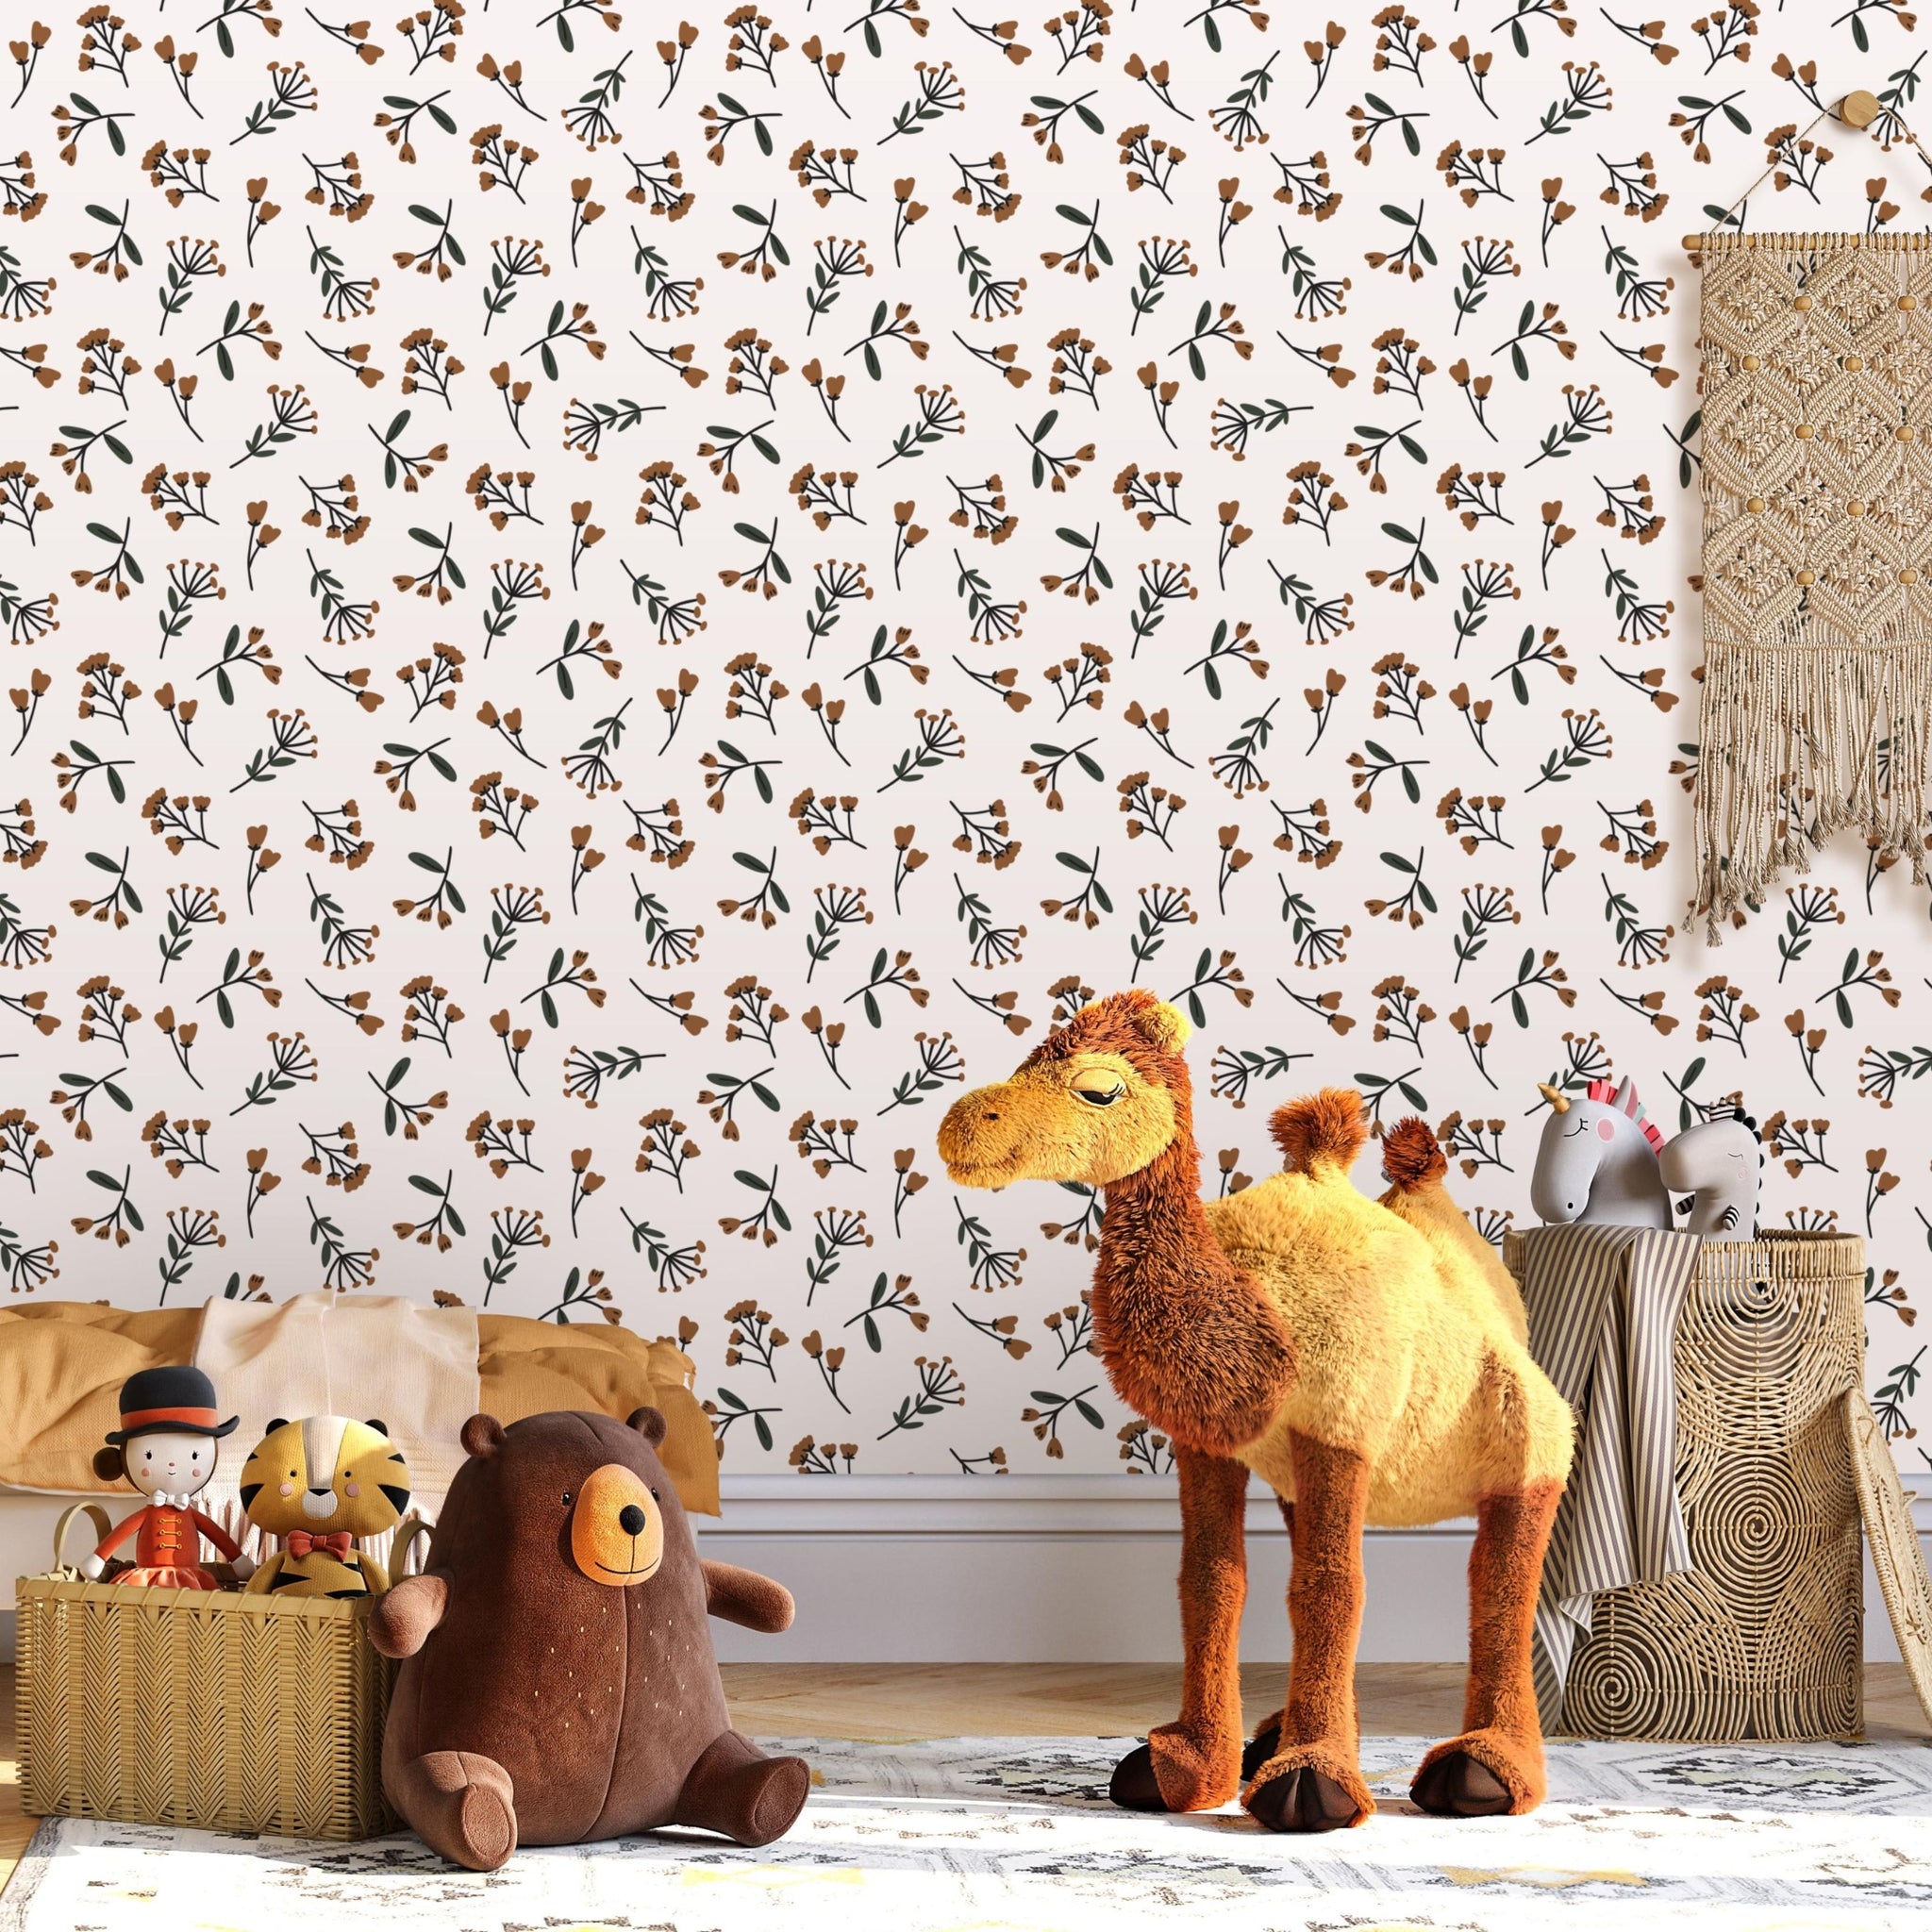 Peel & Stick or Traditional Wallpaper - Bulby Blossoms